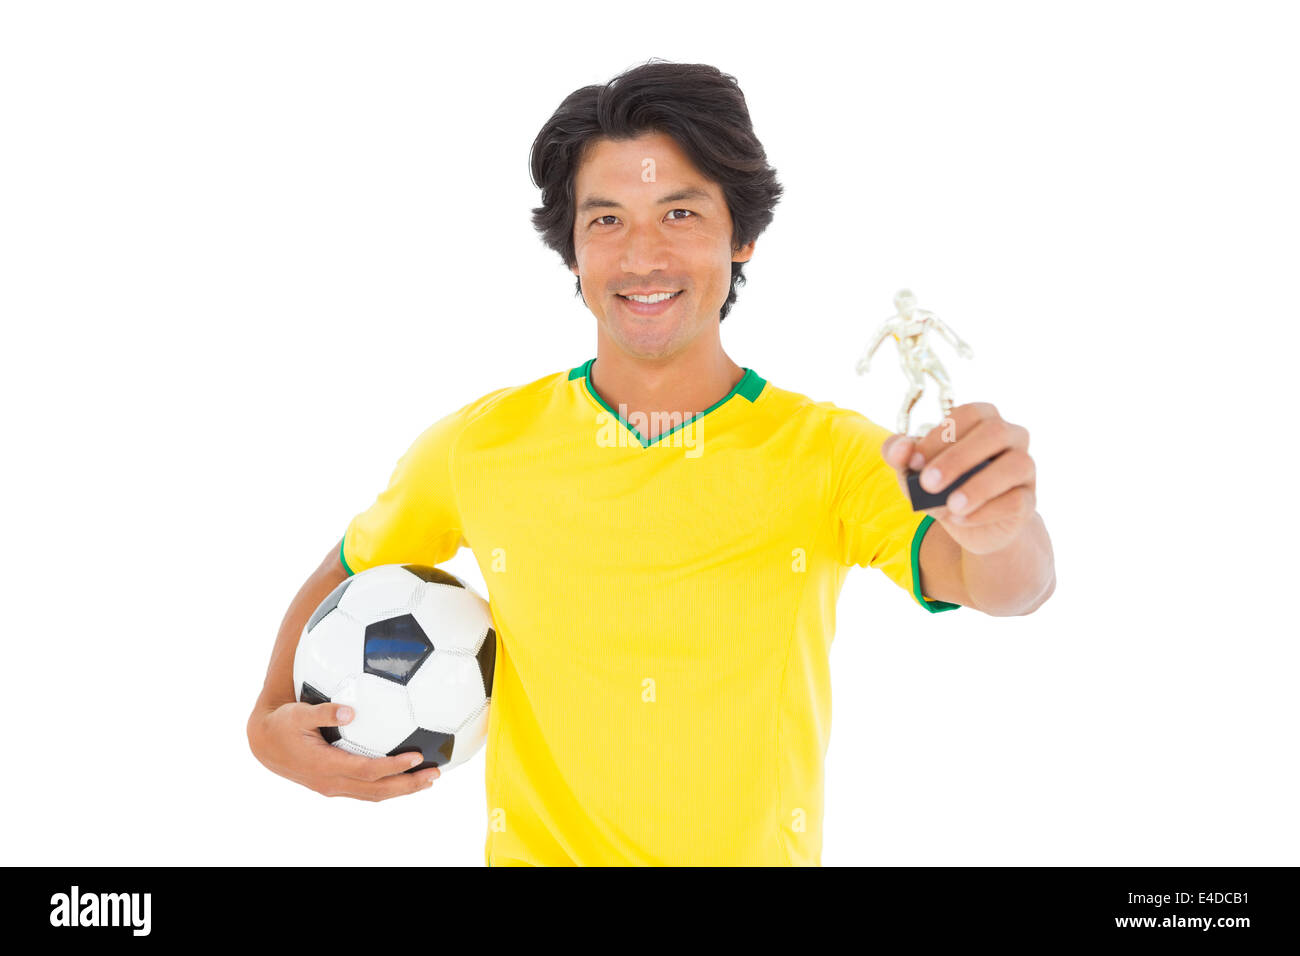 Football player in yellow holding winners trophy Stock Photo